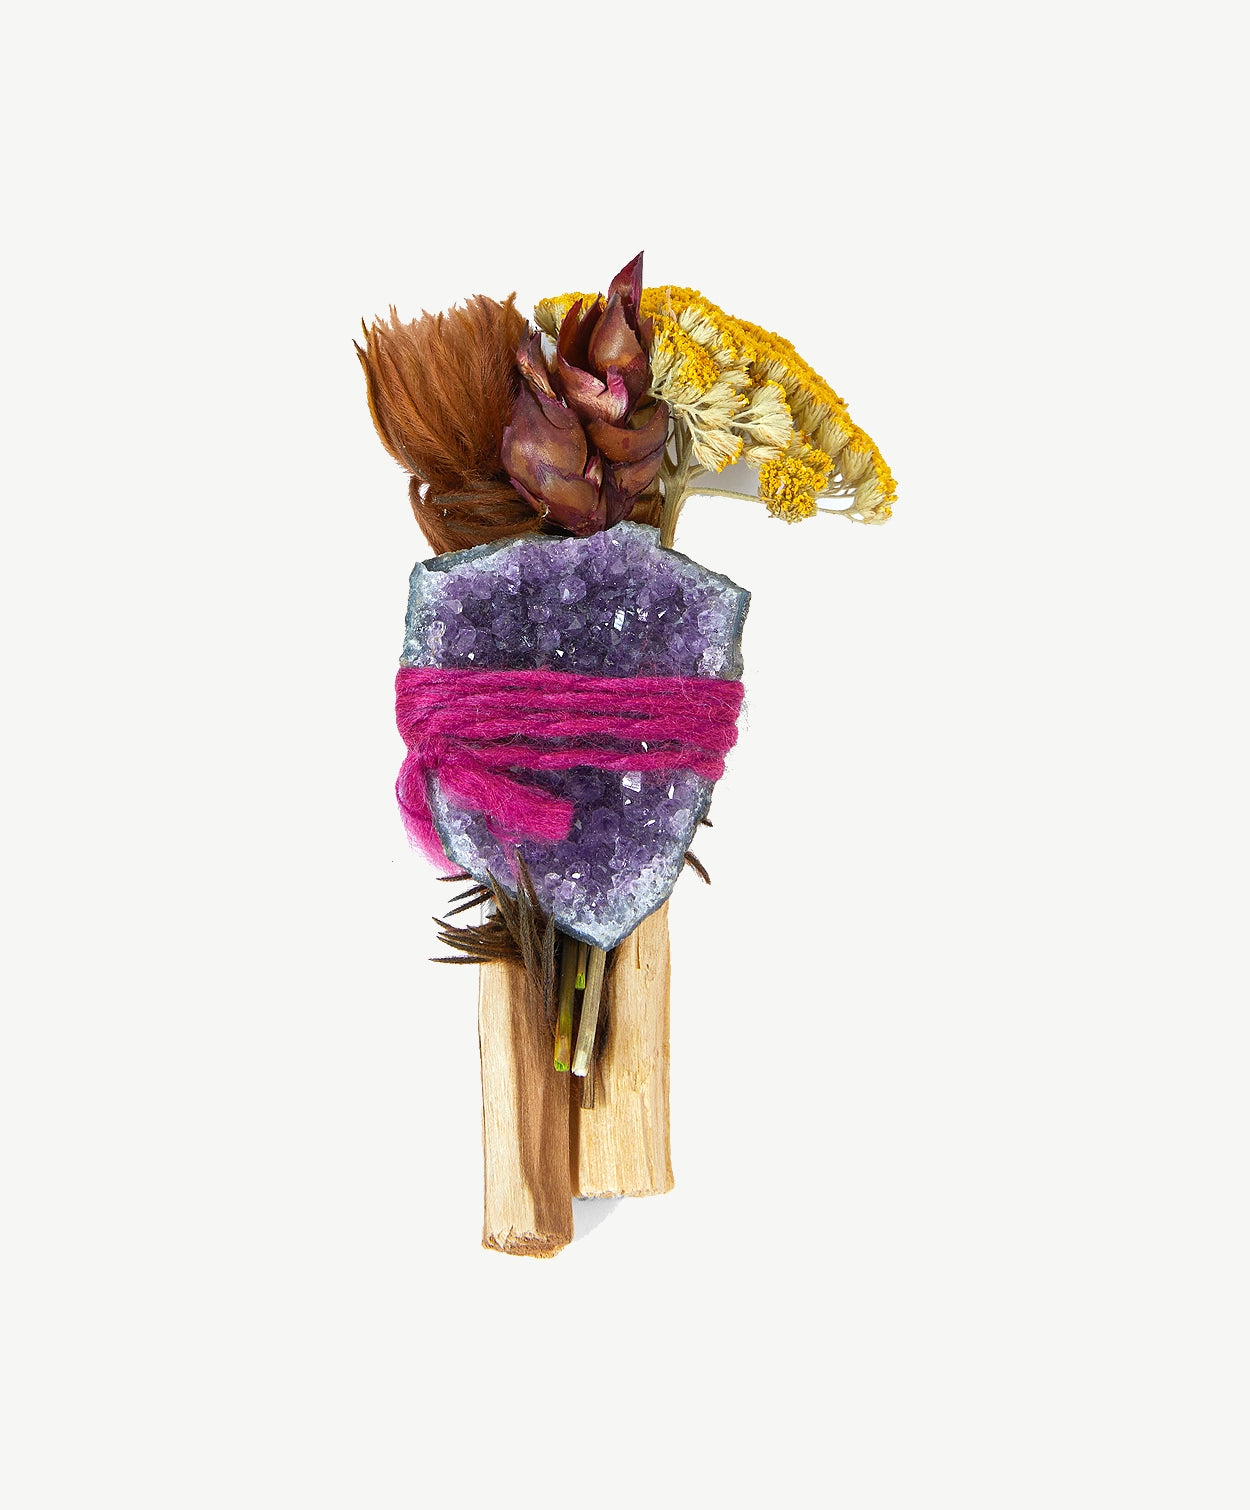 Palo Santo stick tied together with a purple crystal and dried flowers on a white background.